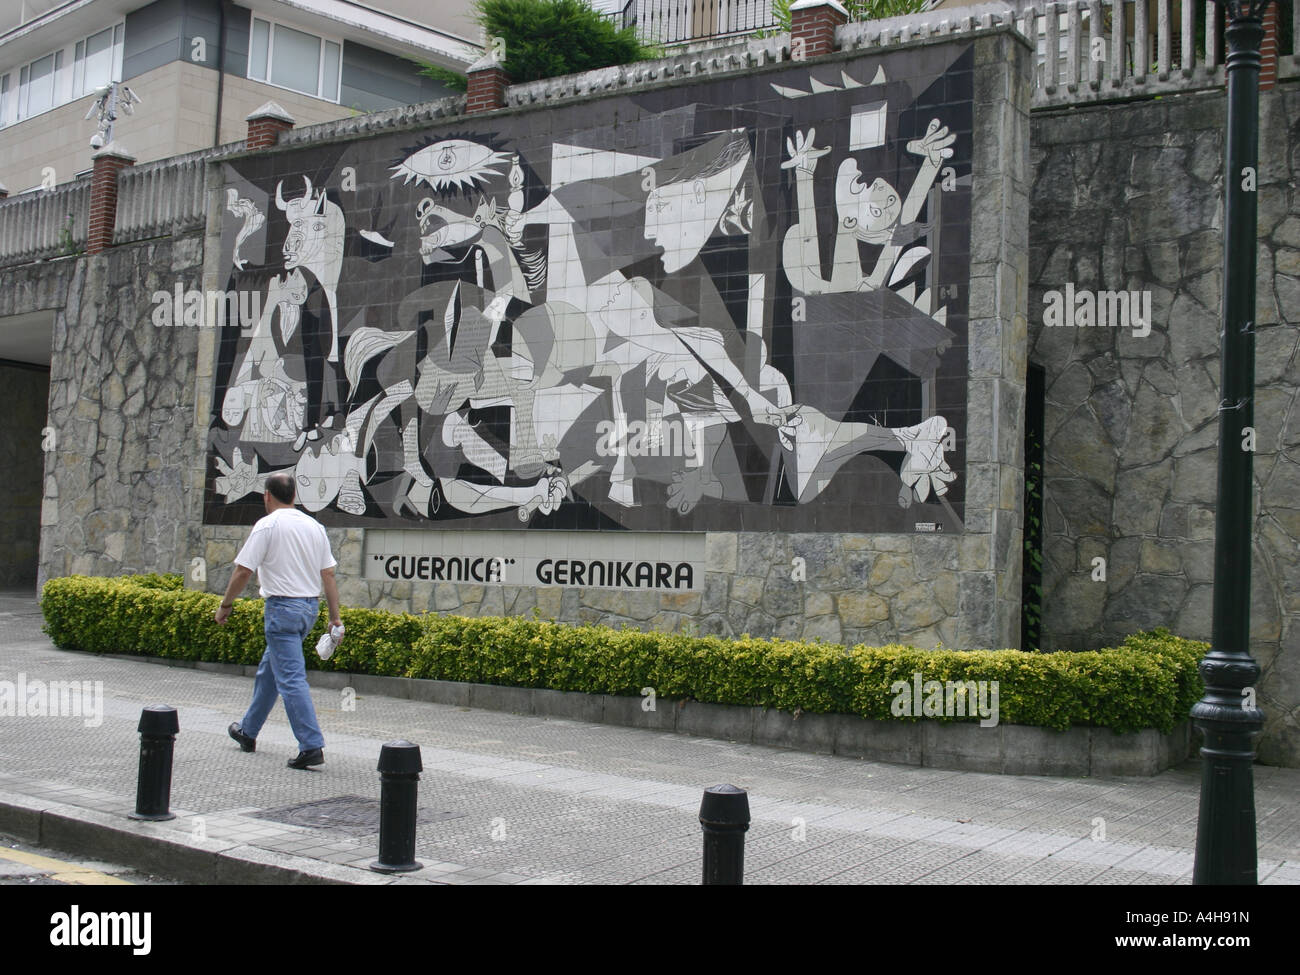 Man walking past tiled street mural of Picasso's Guernica in the town of Guernica, Biscay, Basque Country, Spain Stock Photo